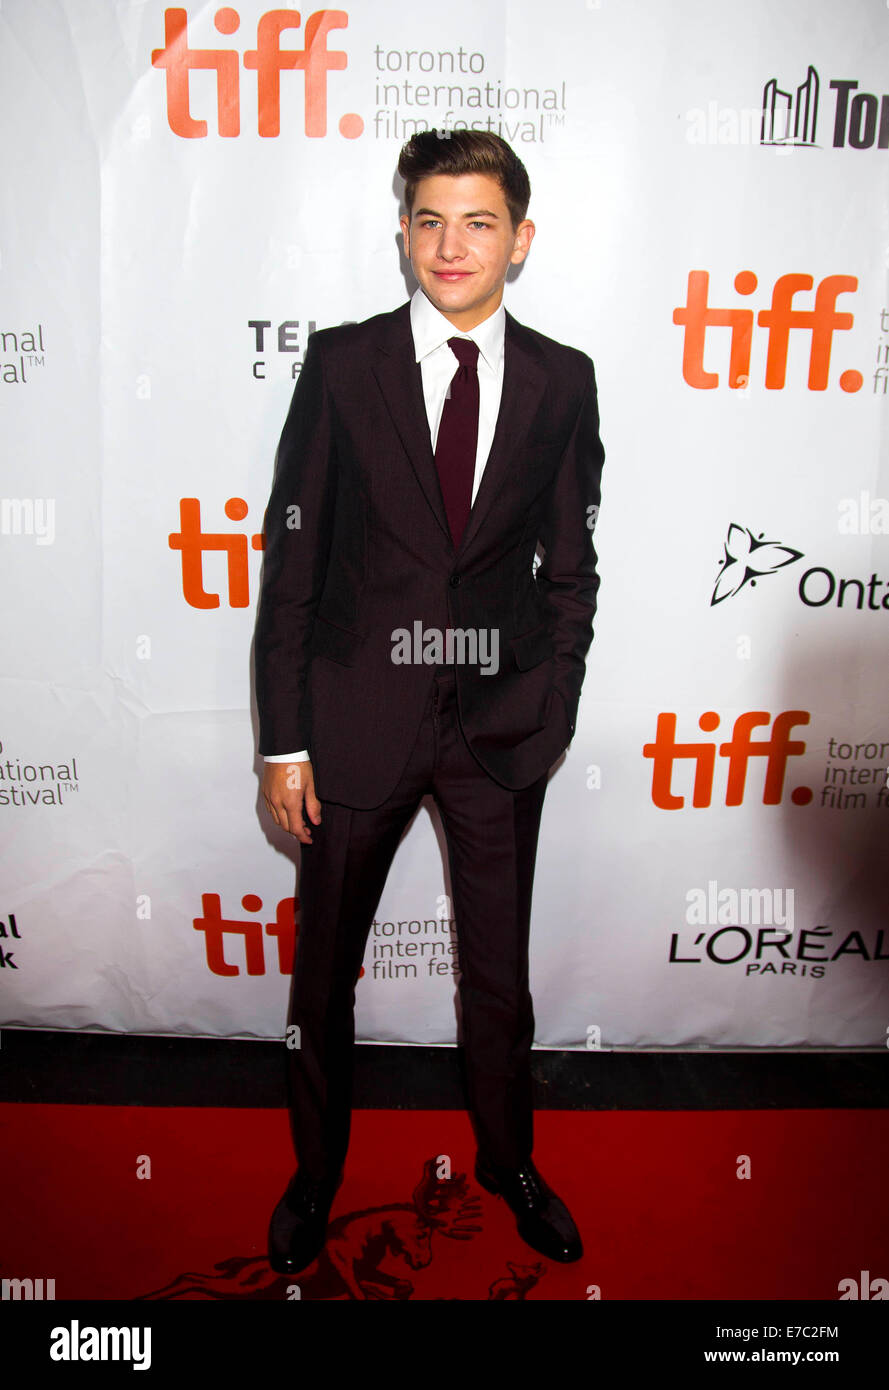 Toronto, Canada. 12th Sep, 2014. Actor Tye Sheridan poses for photos before the premiere of the film 'The Forger' at Roy Thompson Hall during the 39th Toronto International Film Festival in Toronto, Canada, Sept. 12, 2014. Credit:  Zou Zheng/Xinhua/Alamy Live News Stock Photo